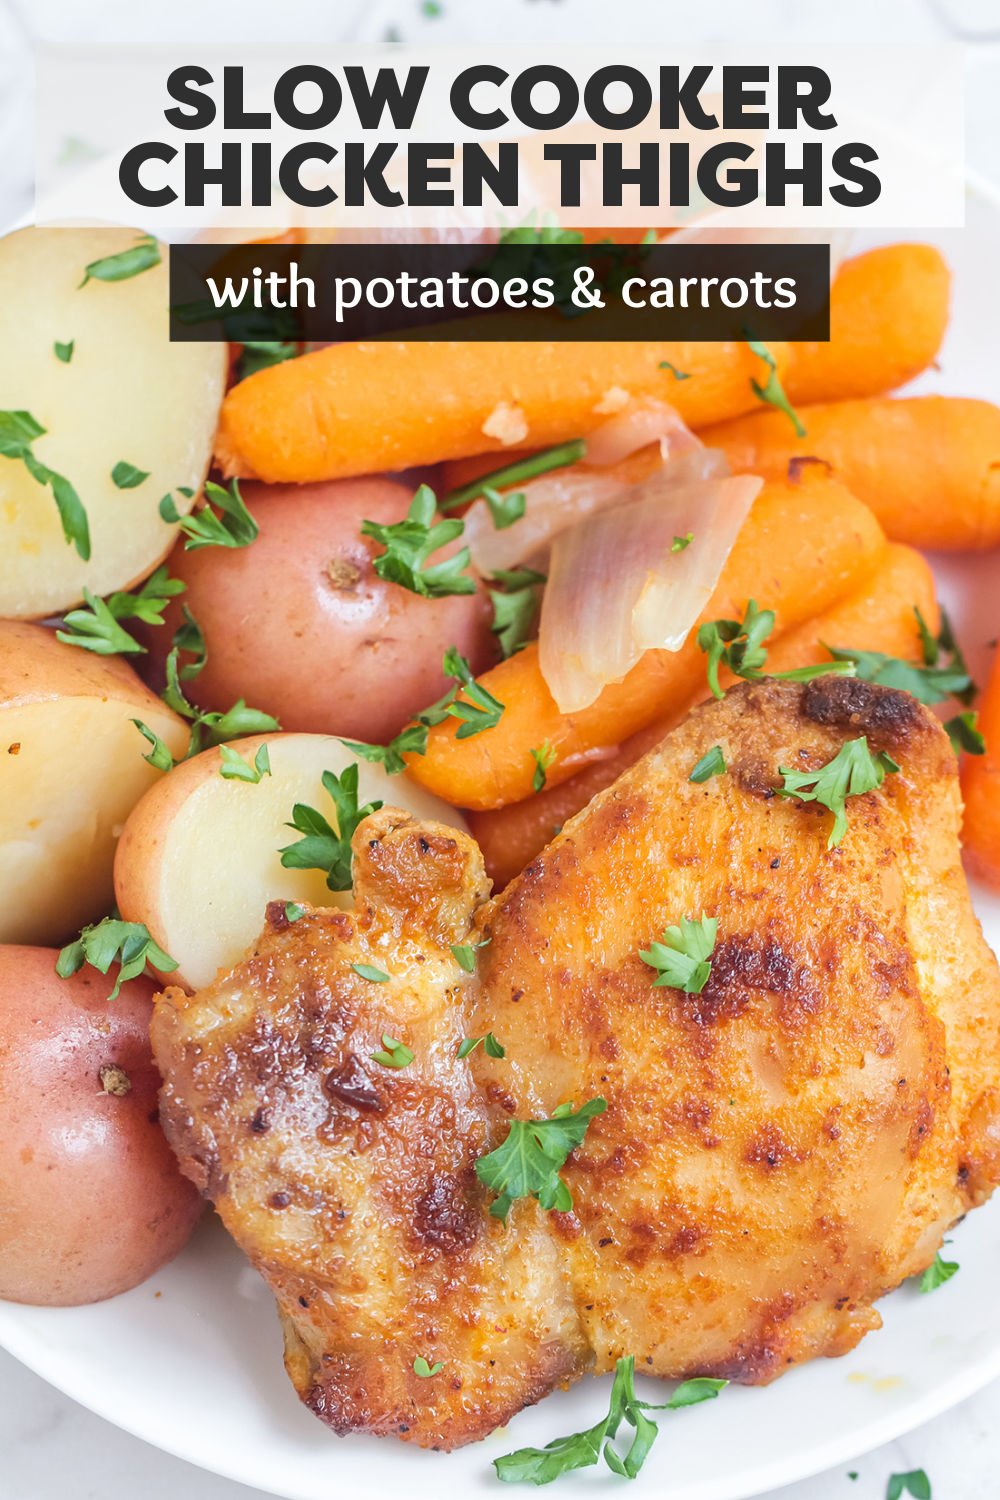 Slow Cooker Chicken Thighs with Potatoes & Carrots is an easy recipe that makes your entire dinner right in the crockpot! Juicy chicken thighs, tender potatoes and carrots, and a flavorful chicken gravy to pour over the top make this a meal the whole family will love. | www.persnicketyplates.com